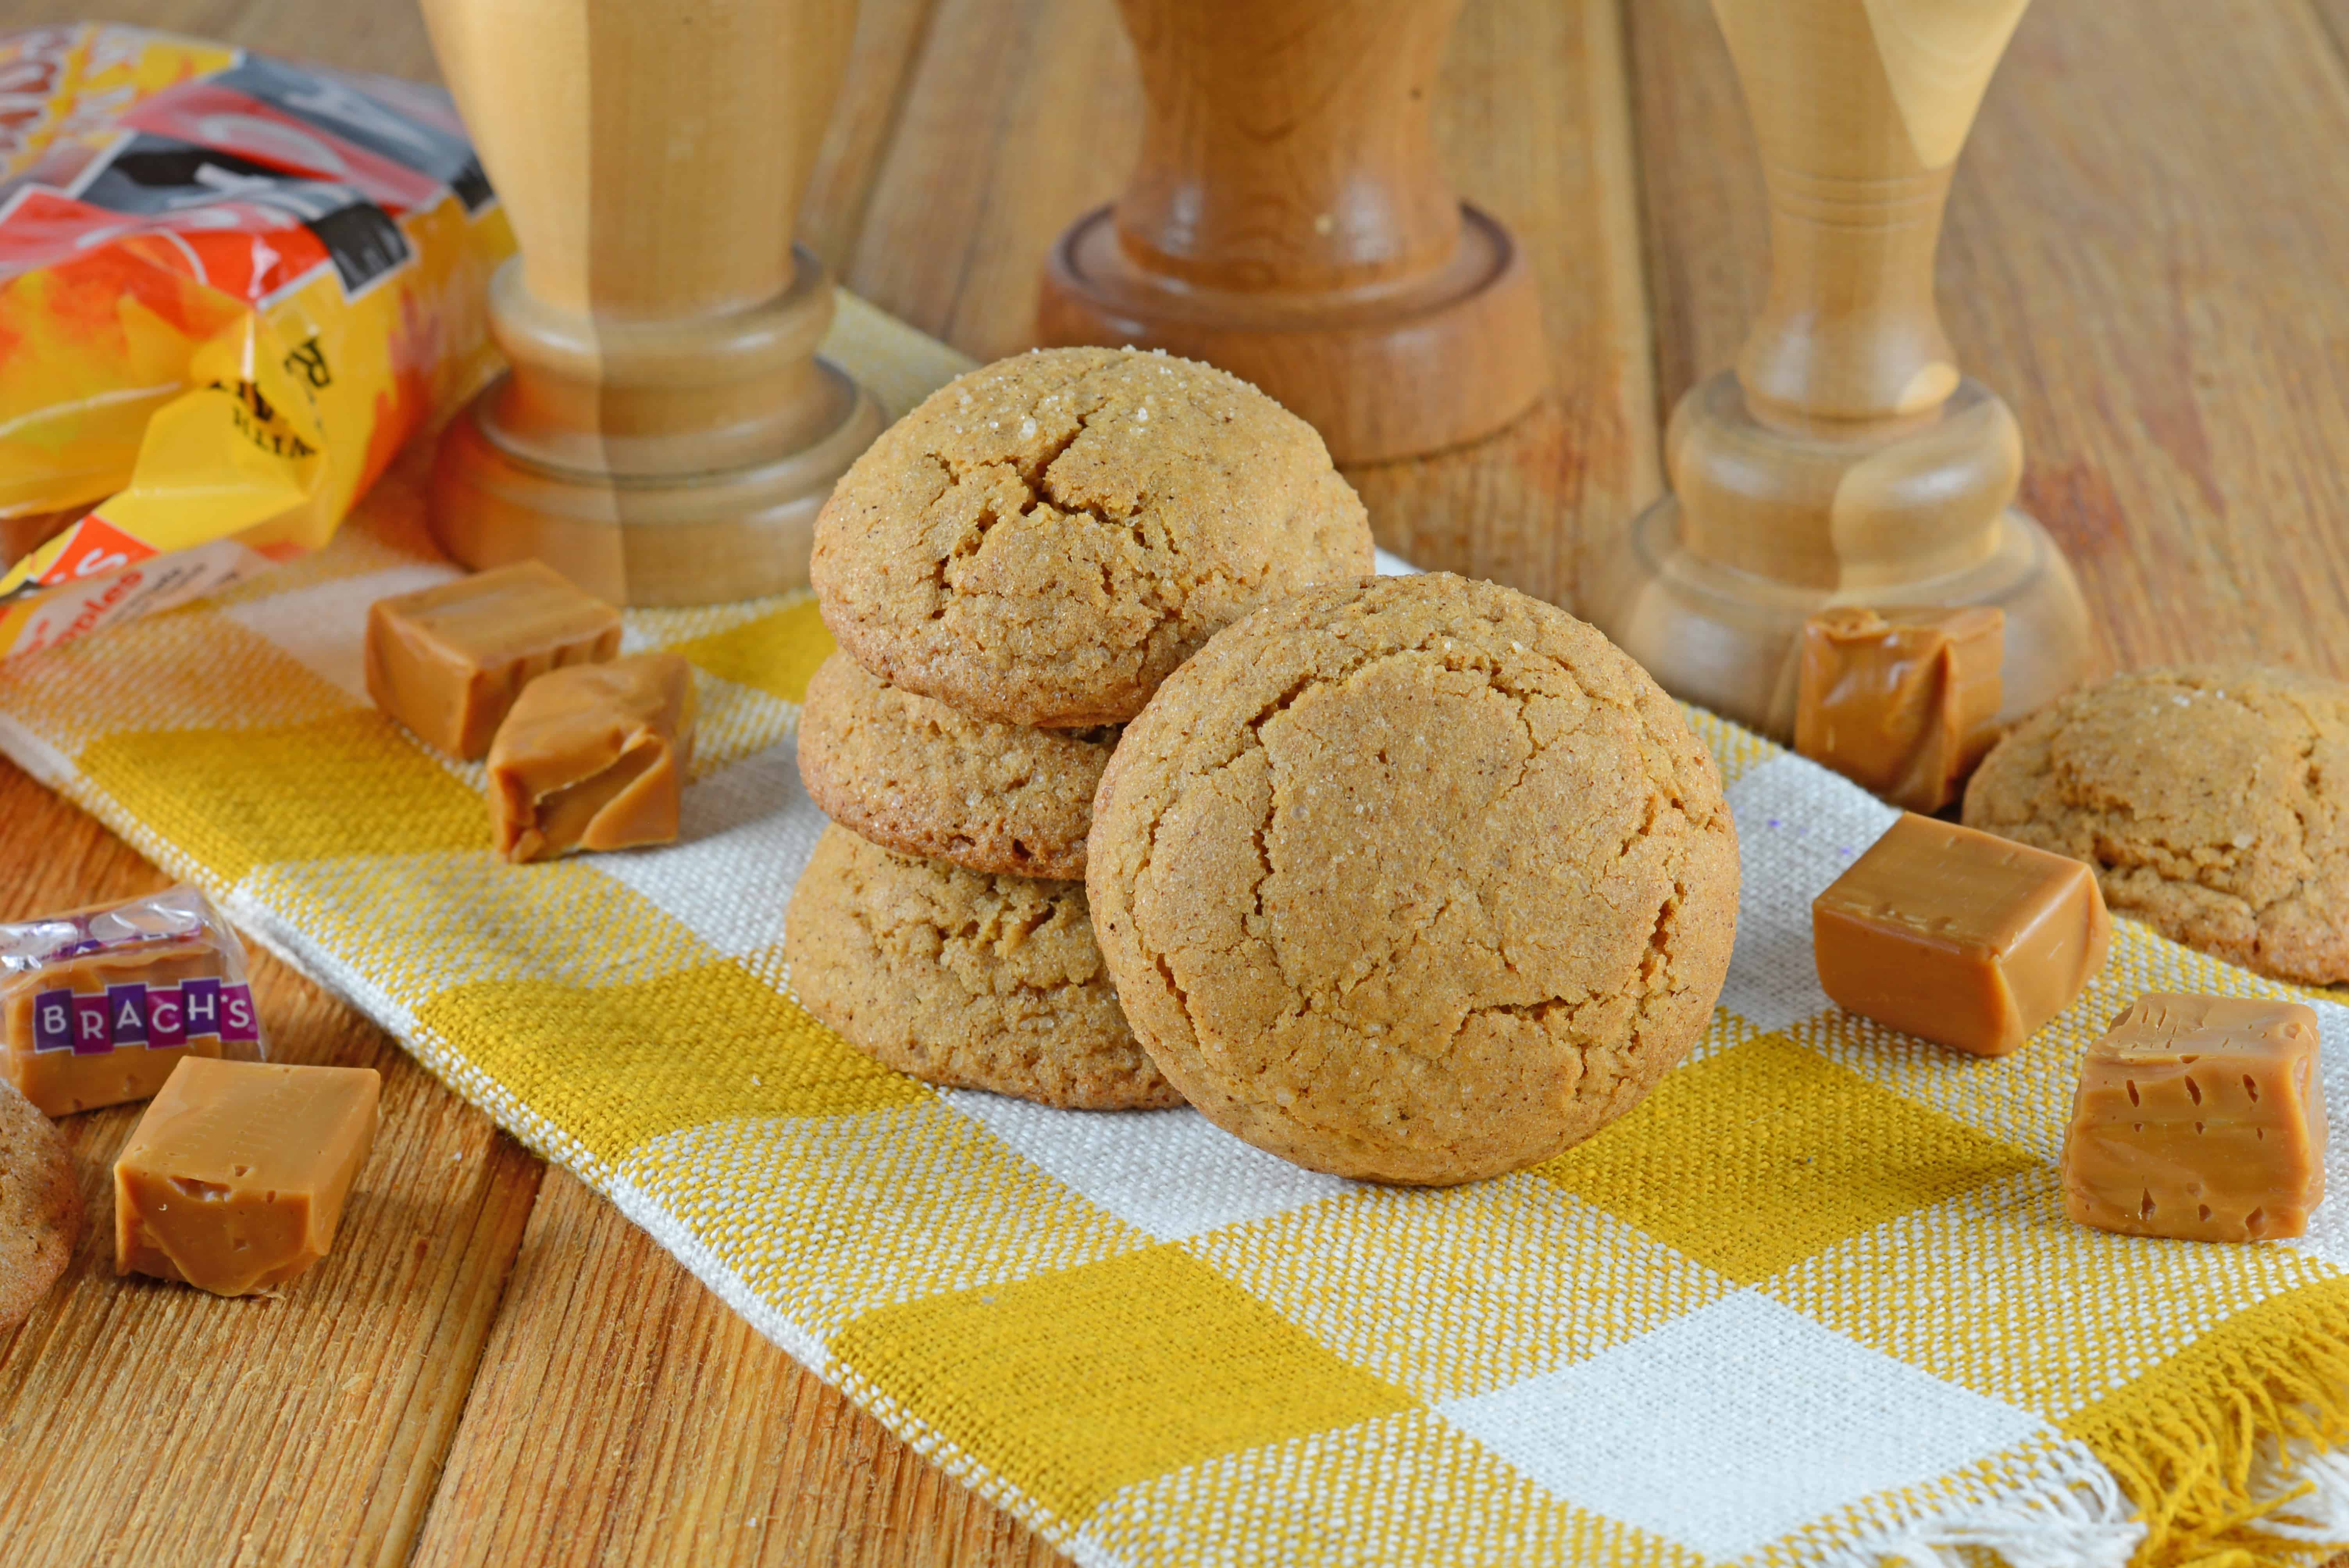 Caramel Apple Cookies are the easy and mess free way to enjoy caramel apples! Apple spiced cookie dough stuffed with gooey caramel is the best apple cookie recipe you will ever taste!